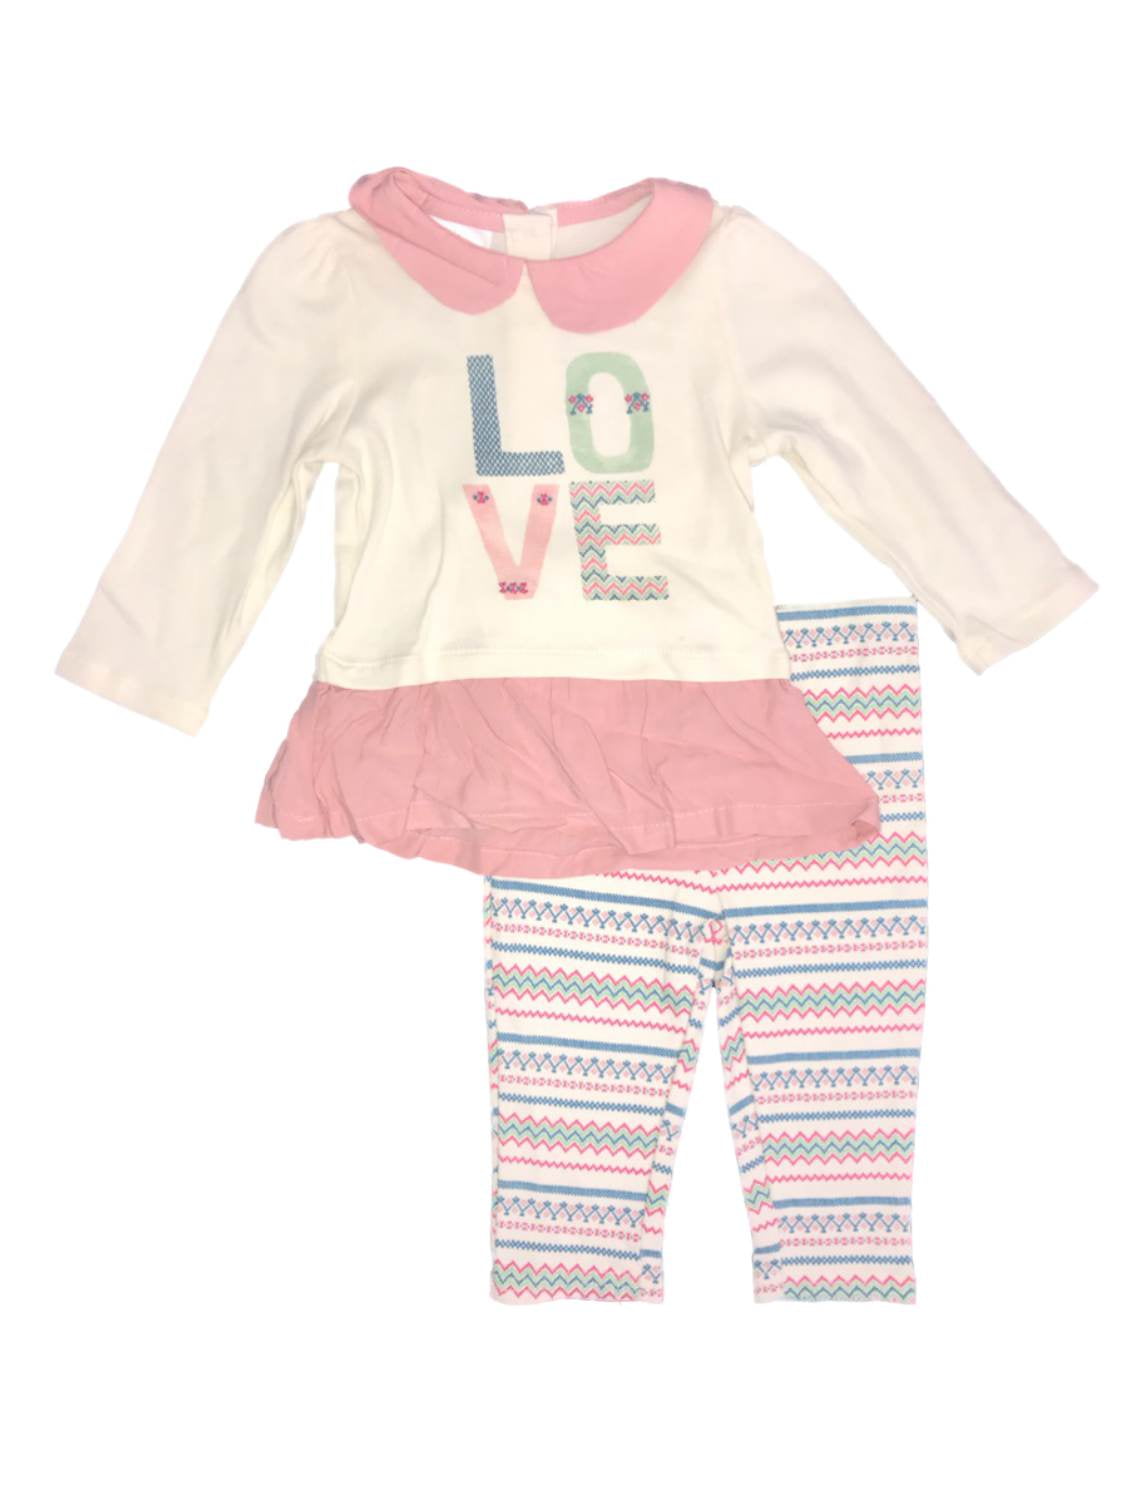 Babaluno Baby Girls Pink Butterfly Cotton Top & Leggings 0 3 6 9 12 18 24 Months 